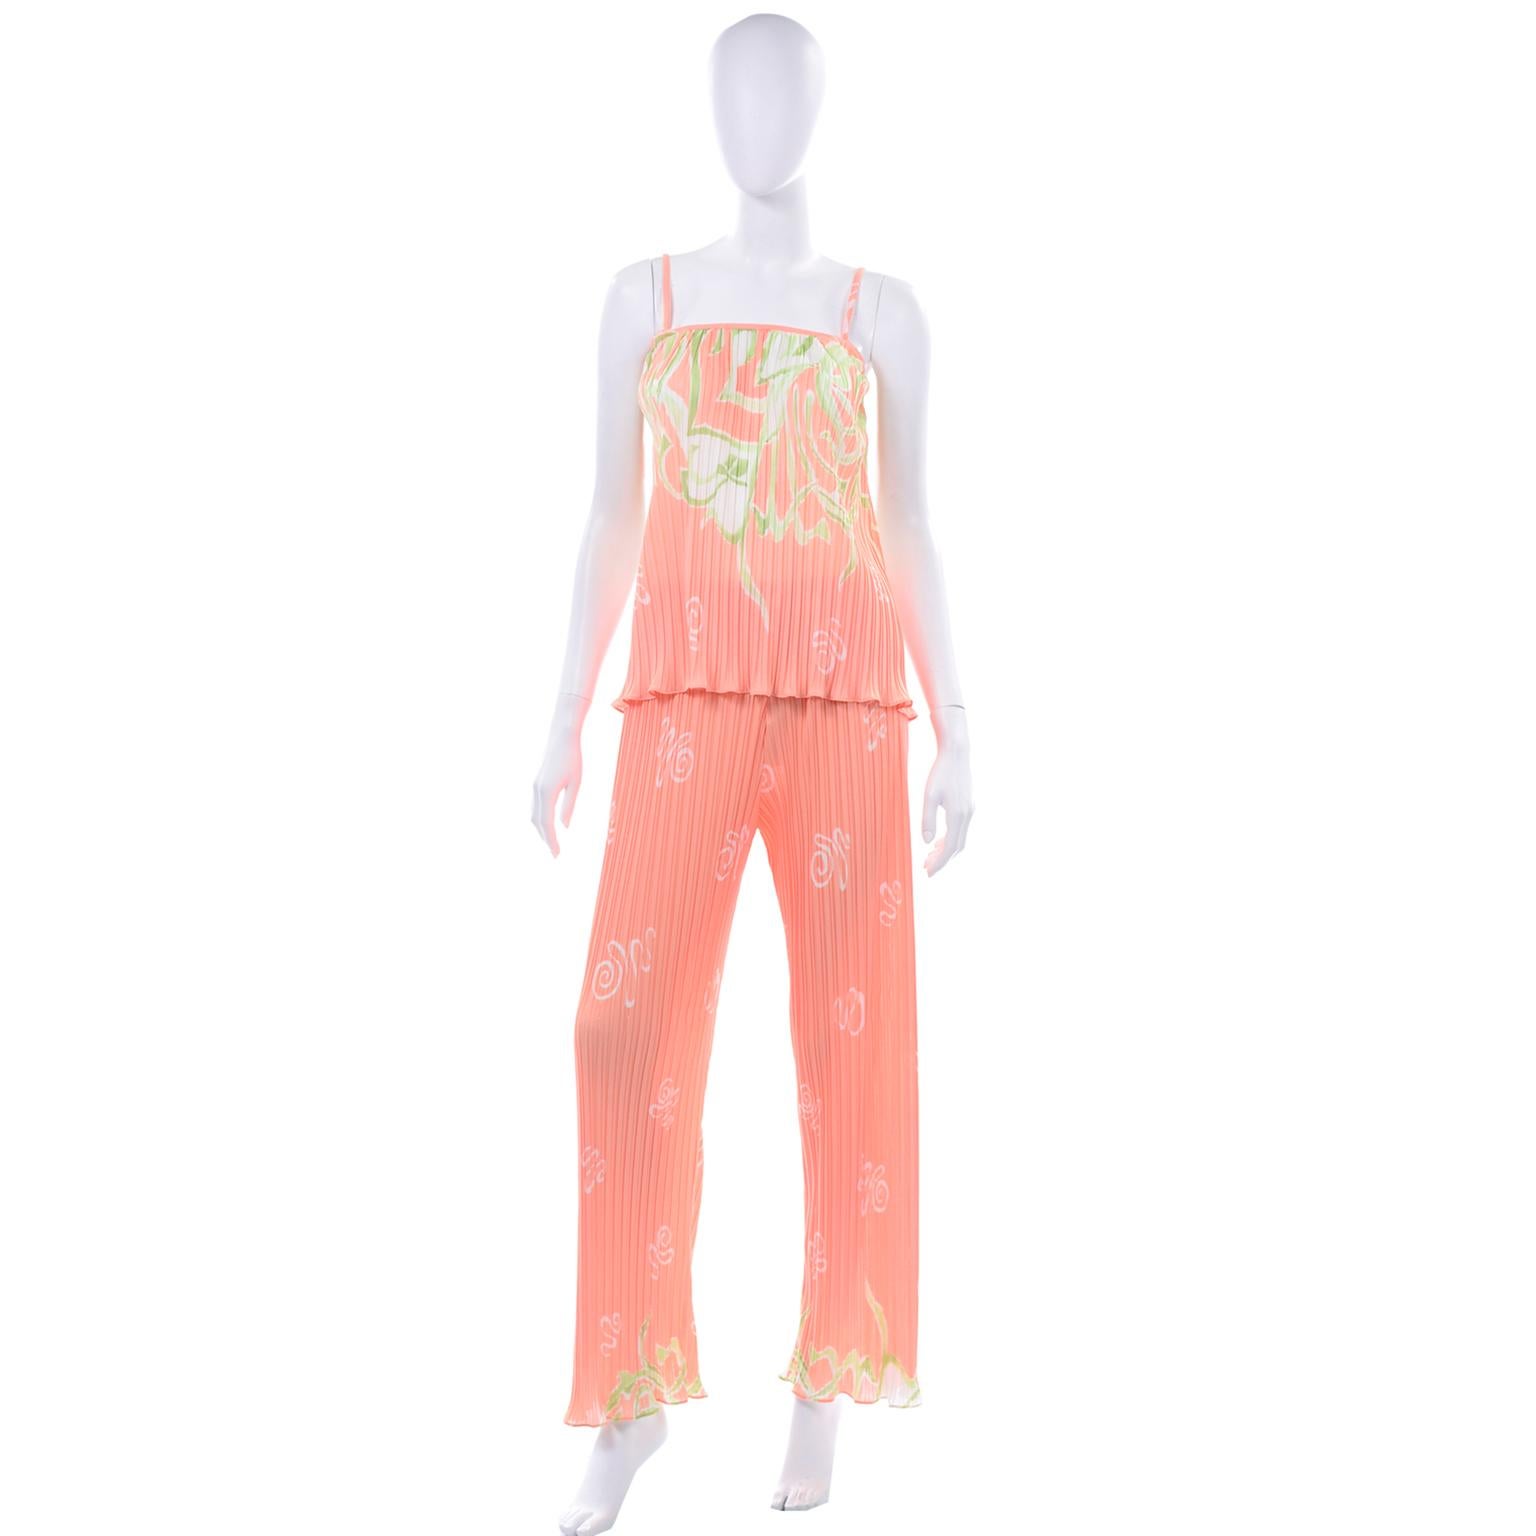 This is a 3 piece loungewear set from Bill Tice for Swirl with the original vintage Nordstrom price tag still attached.. We think that this lovely outfit could be worn as a daytime casual ensemble as well as loungewear! 
This set includes a sleep